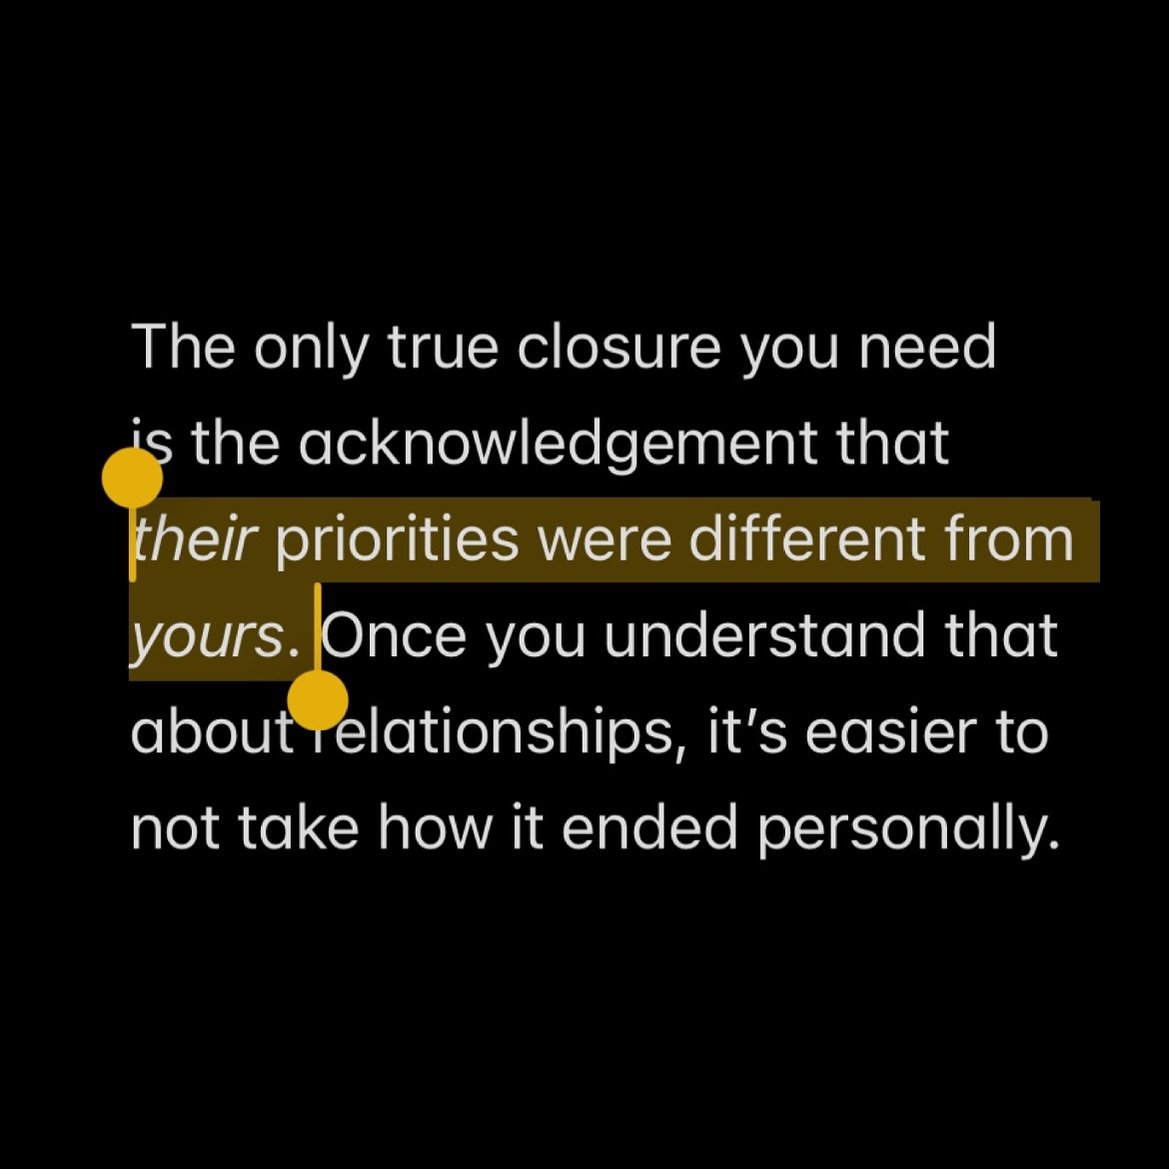 You can speculate about a thousand different reasons why the relationship ended.

But it won&rsquo;t change the fact that, at the end of the day, you had conflicting priorities.&nbsp;

That&rsquo;s why it ended the way it ended.

You CAN&rsquo;T have